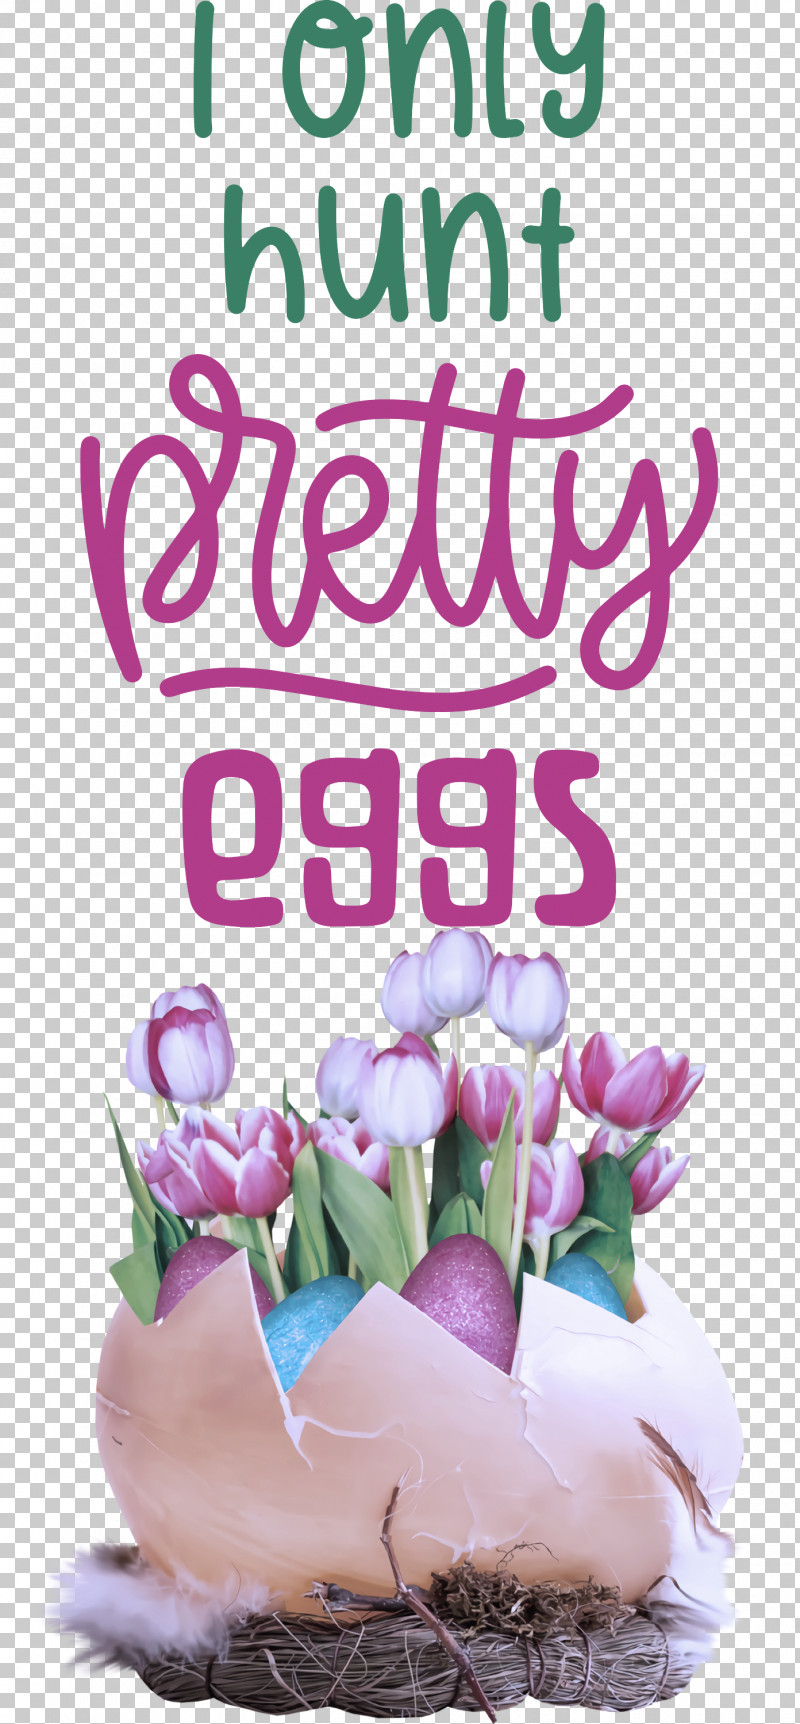 Hunt Pretty Eggs Egg Easter Day PNG, Clipart, Buttercream, Cake, Cake Decorating, Chicken, Chicken Egg Free PNG Download